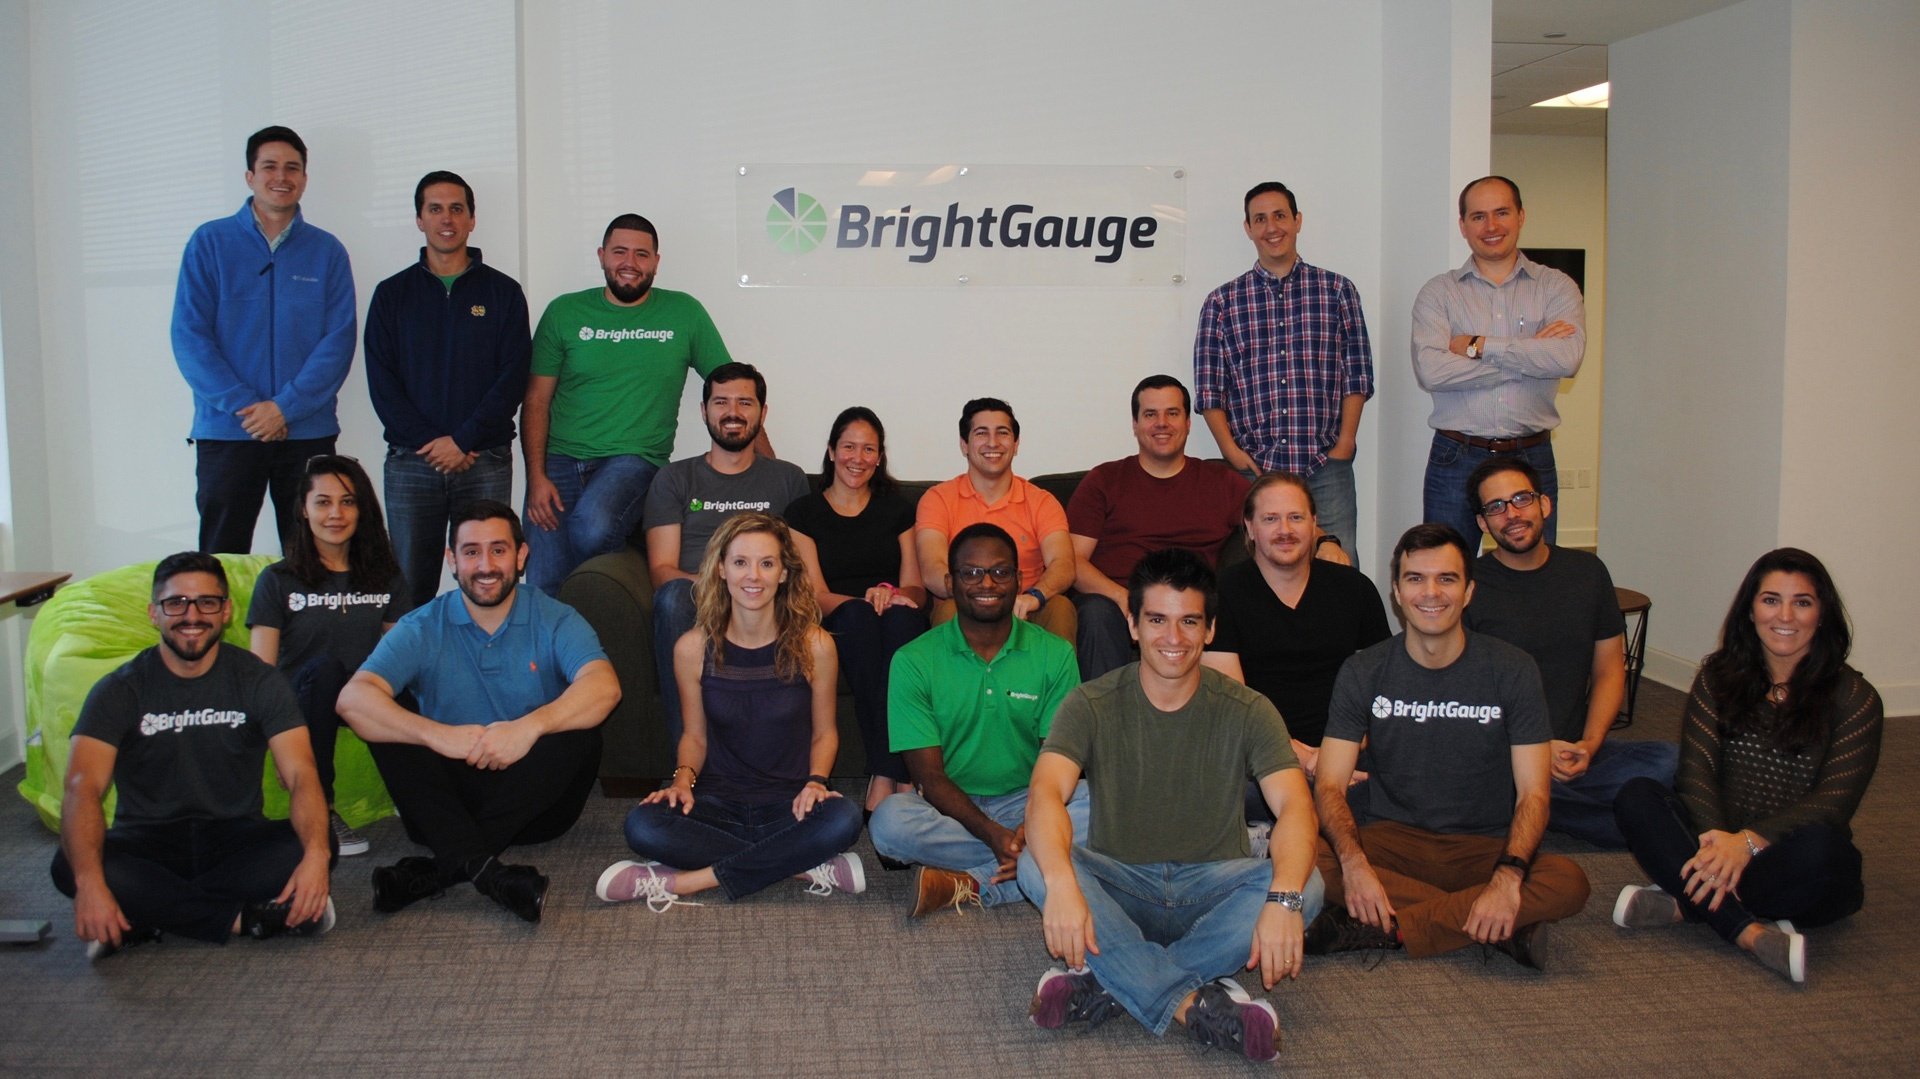 Larry Garcia Promoted to Director of Sales at BrightGauge